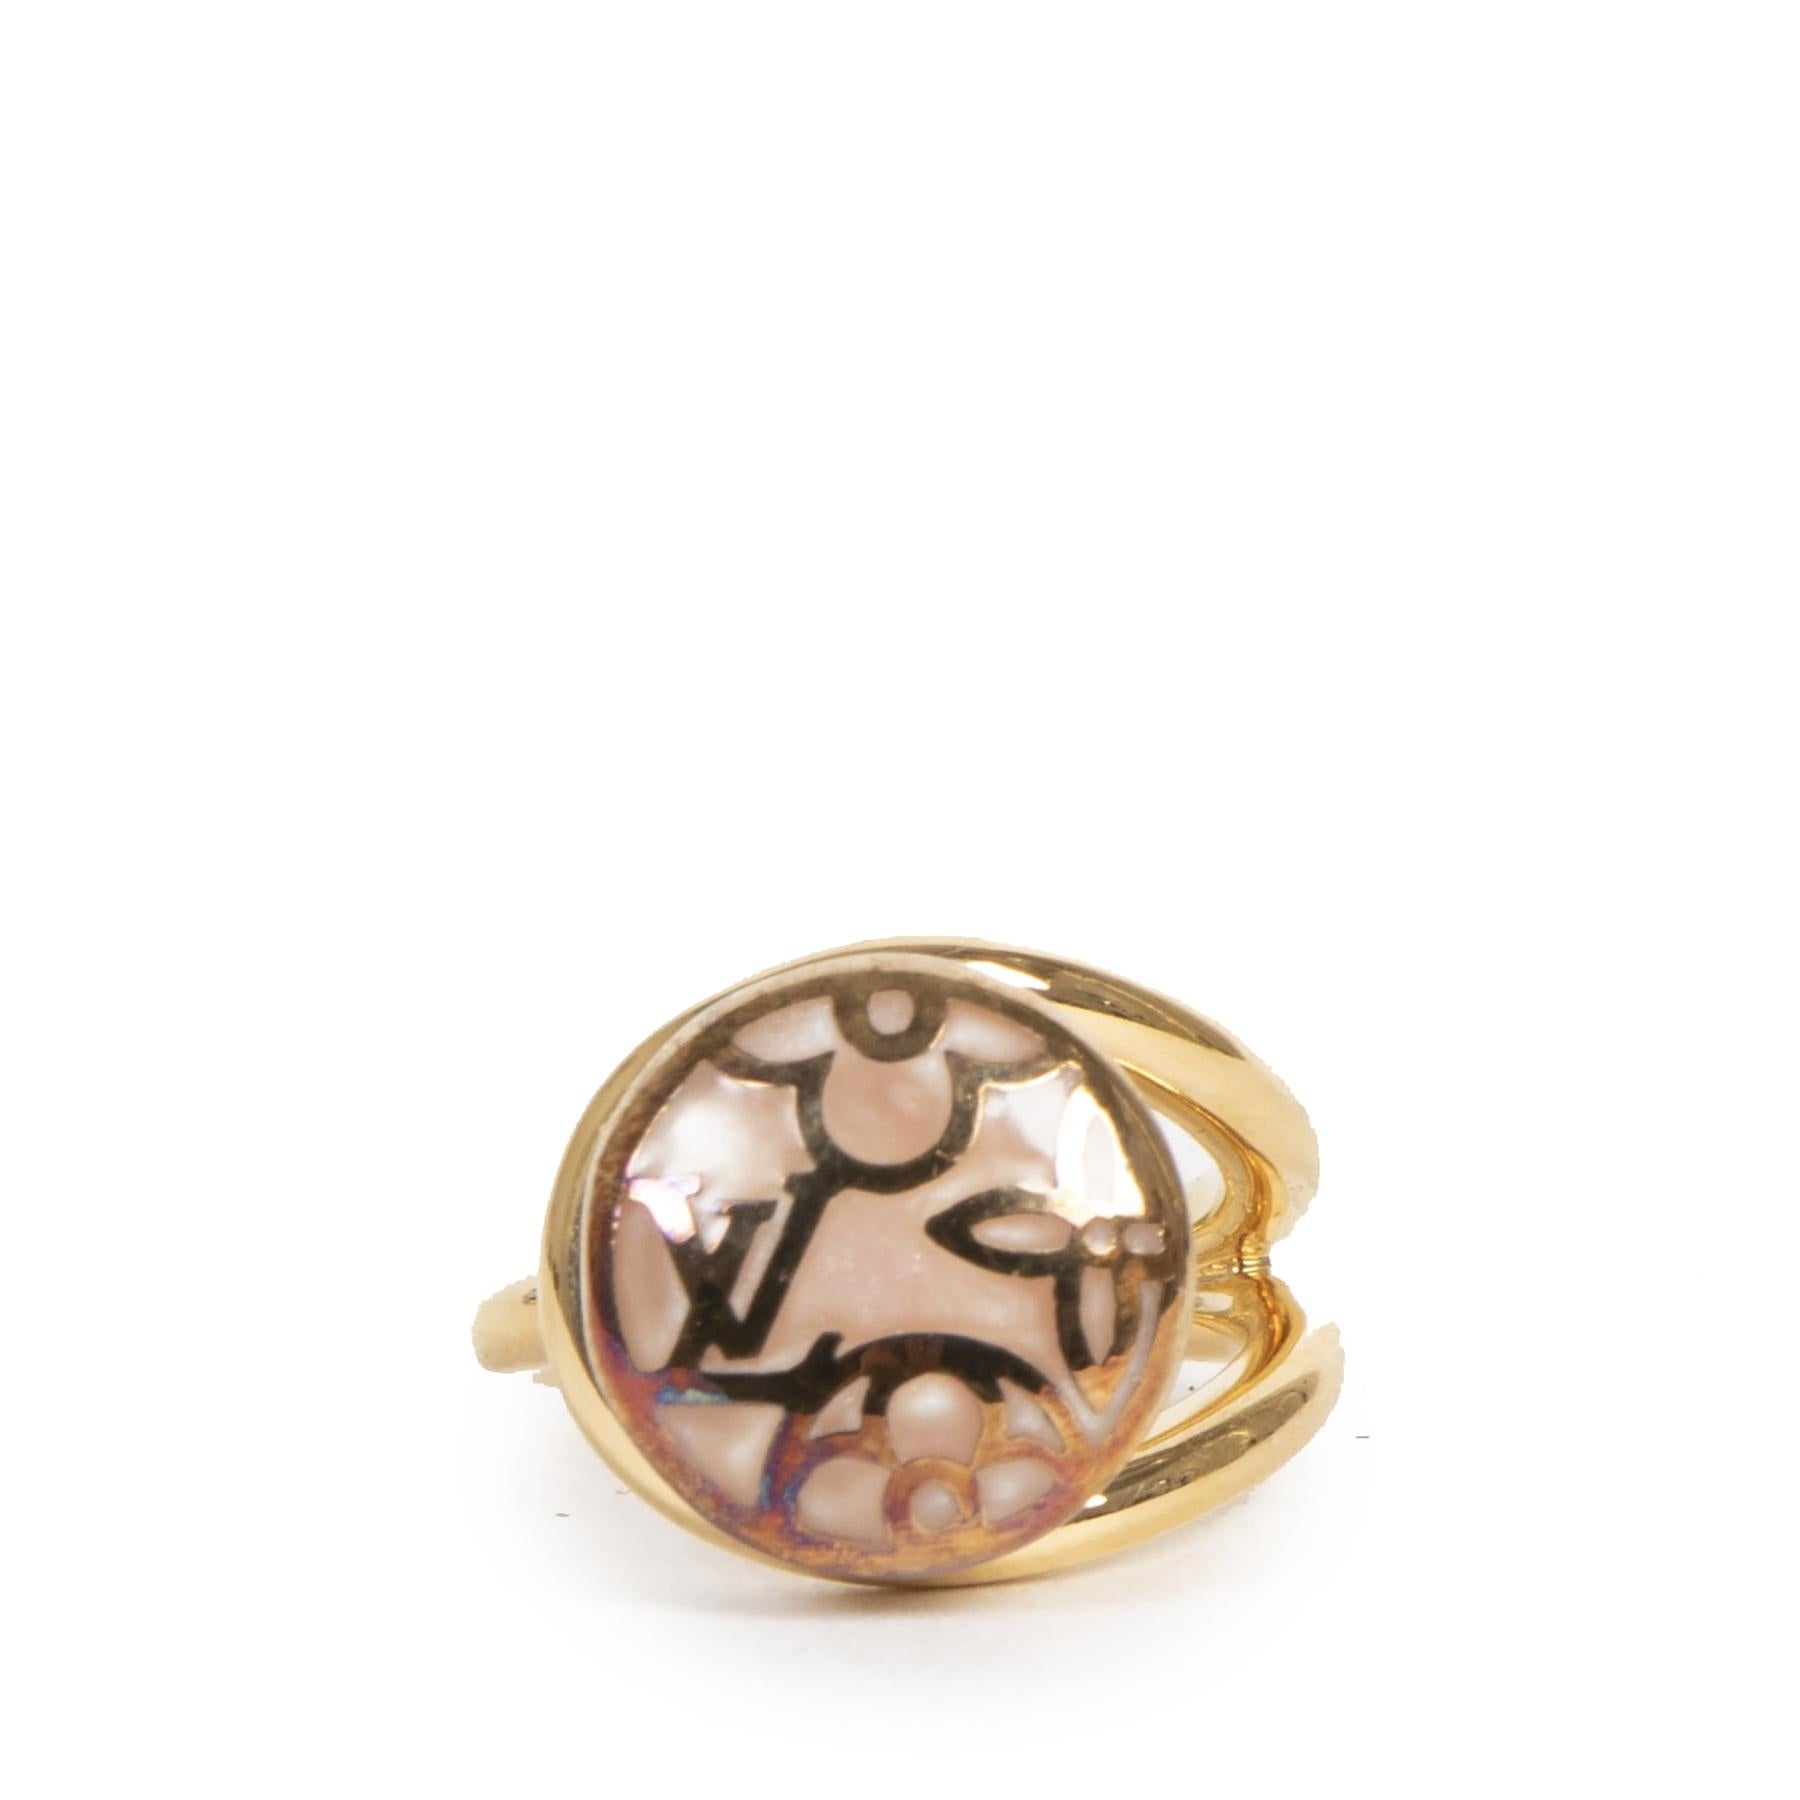 Very good condition

Louis Vuitton Celeste Ring - Size 52,5

A piece of jewellery is the easiest way to turn any ensemble into an elegant look. The Louis Vuitton Celeste Ring is the perfect piece to add some sparkle to your look. It features a pink